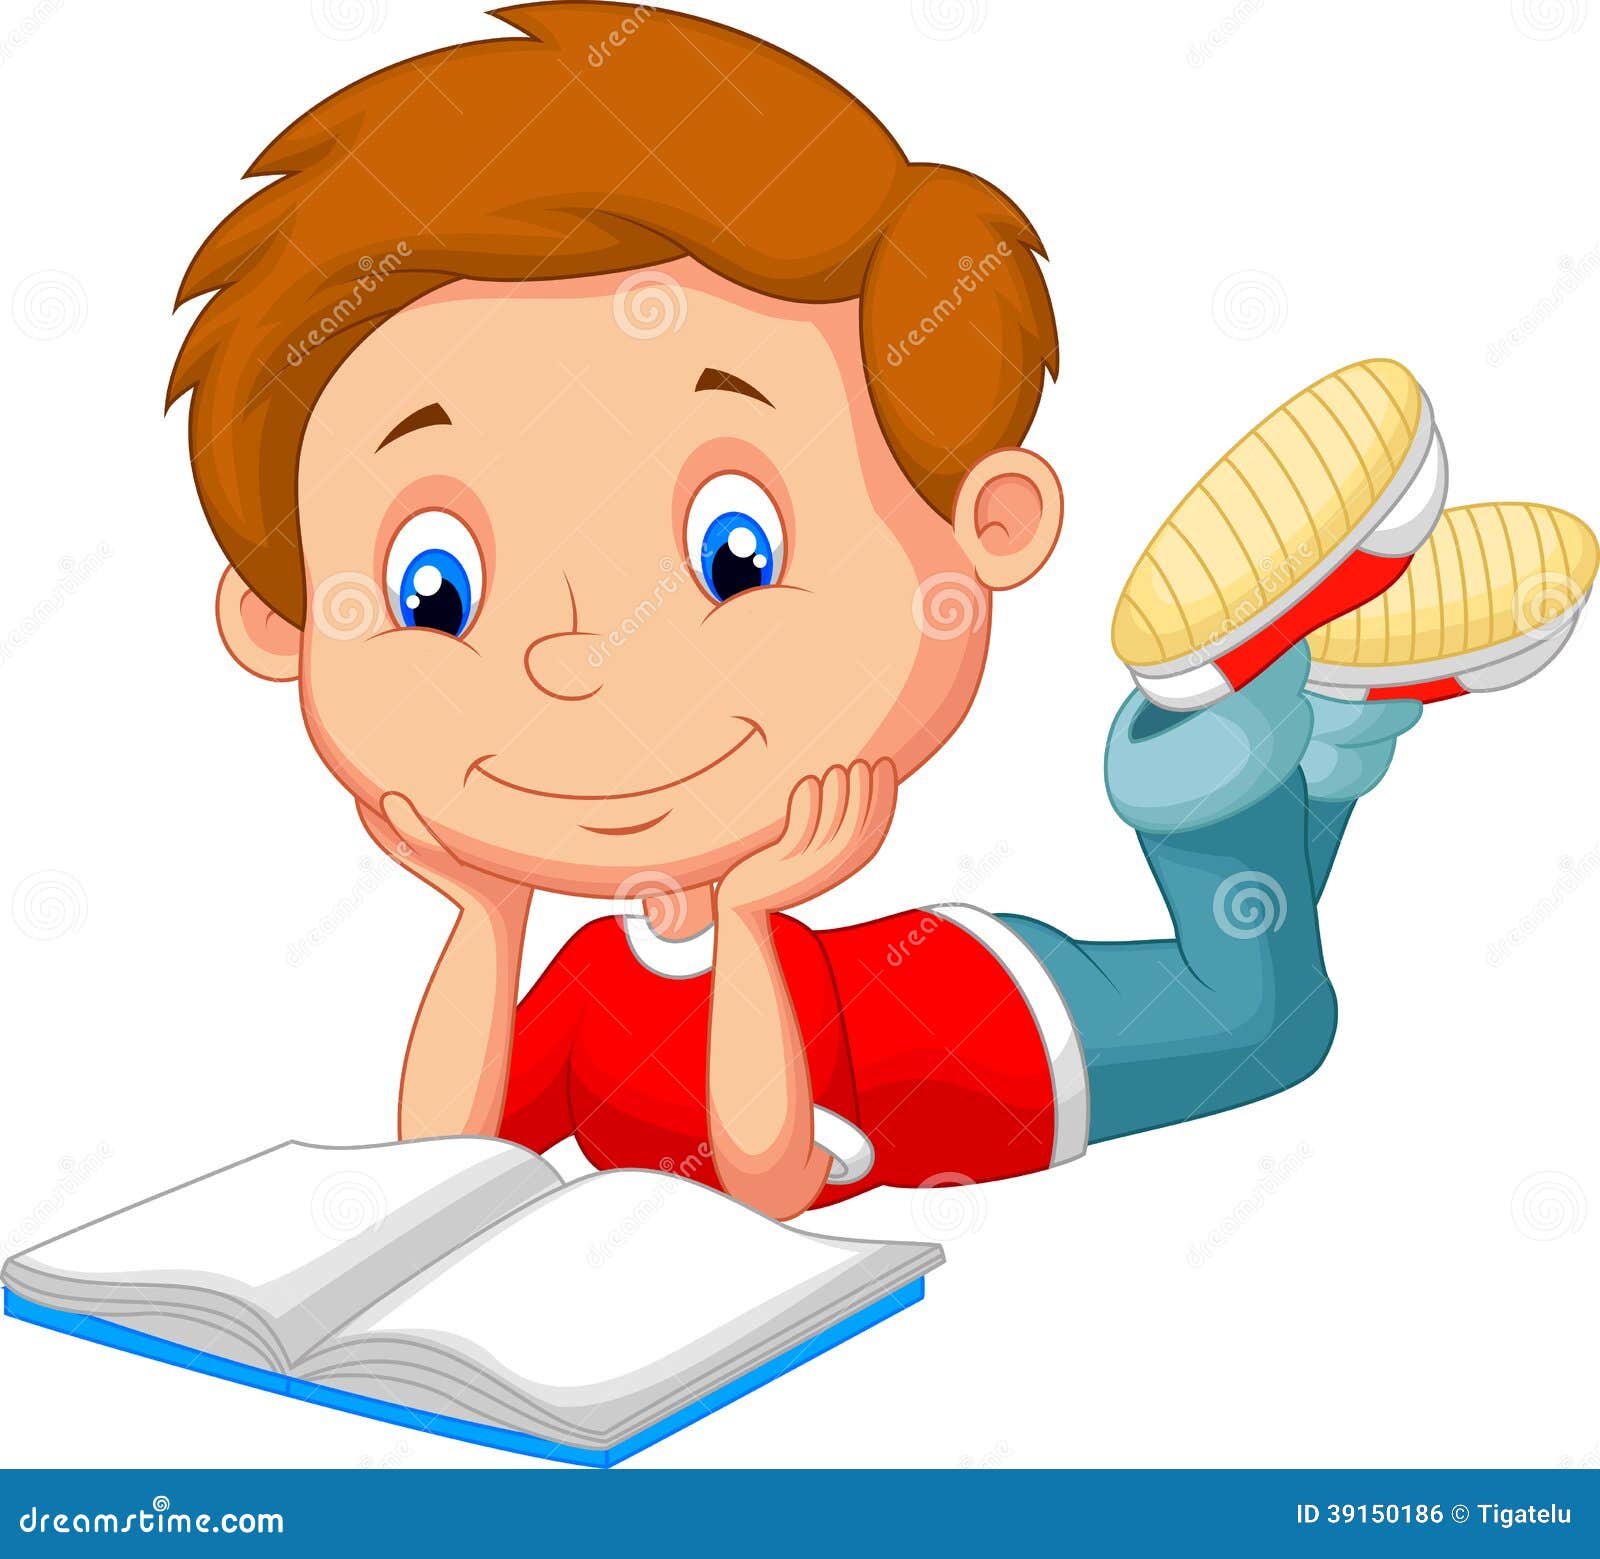 little girl reading a book clipart - photo #22